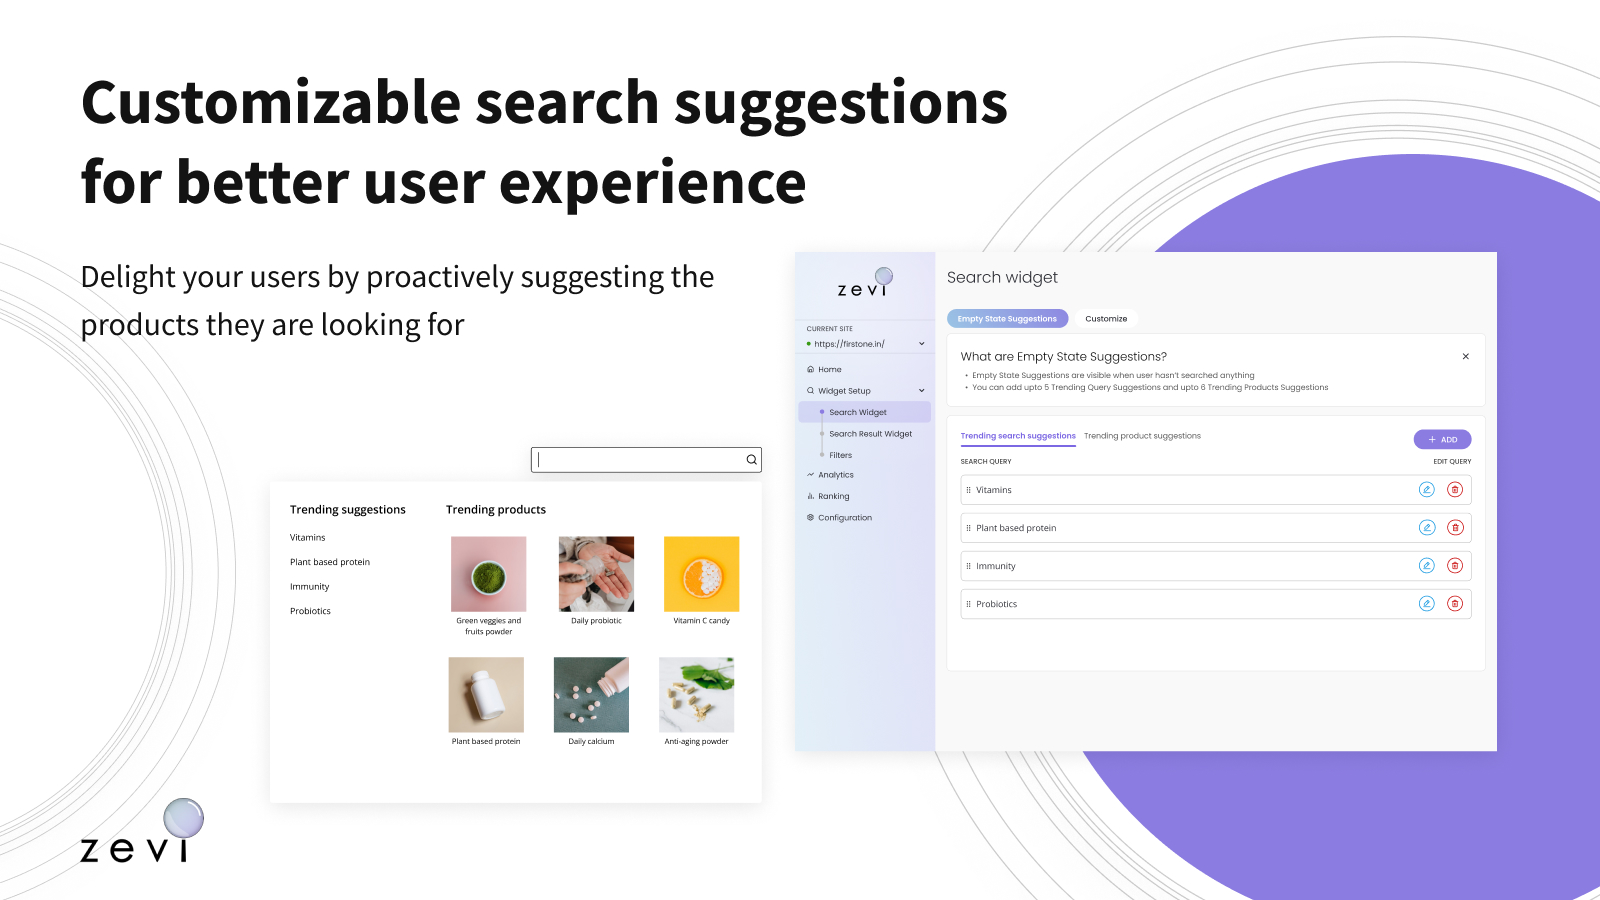 Customized search suggestions to improve discoverability